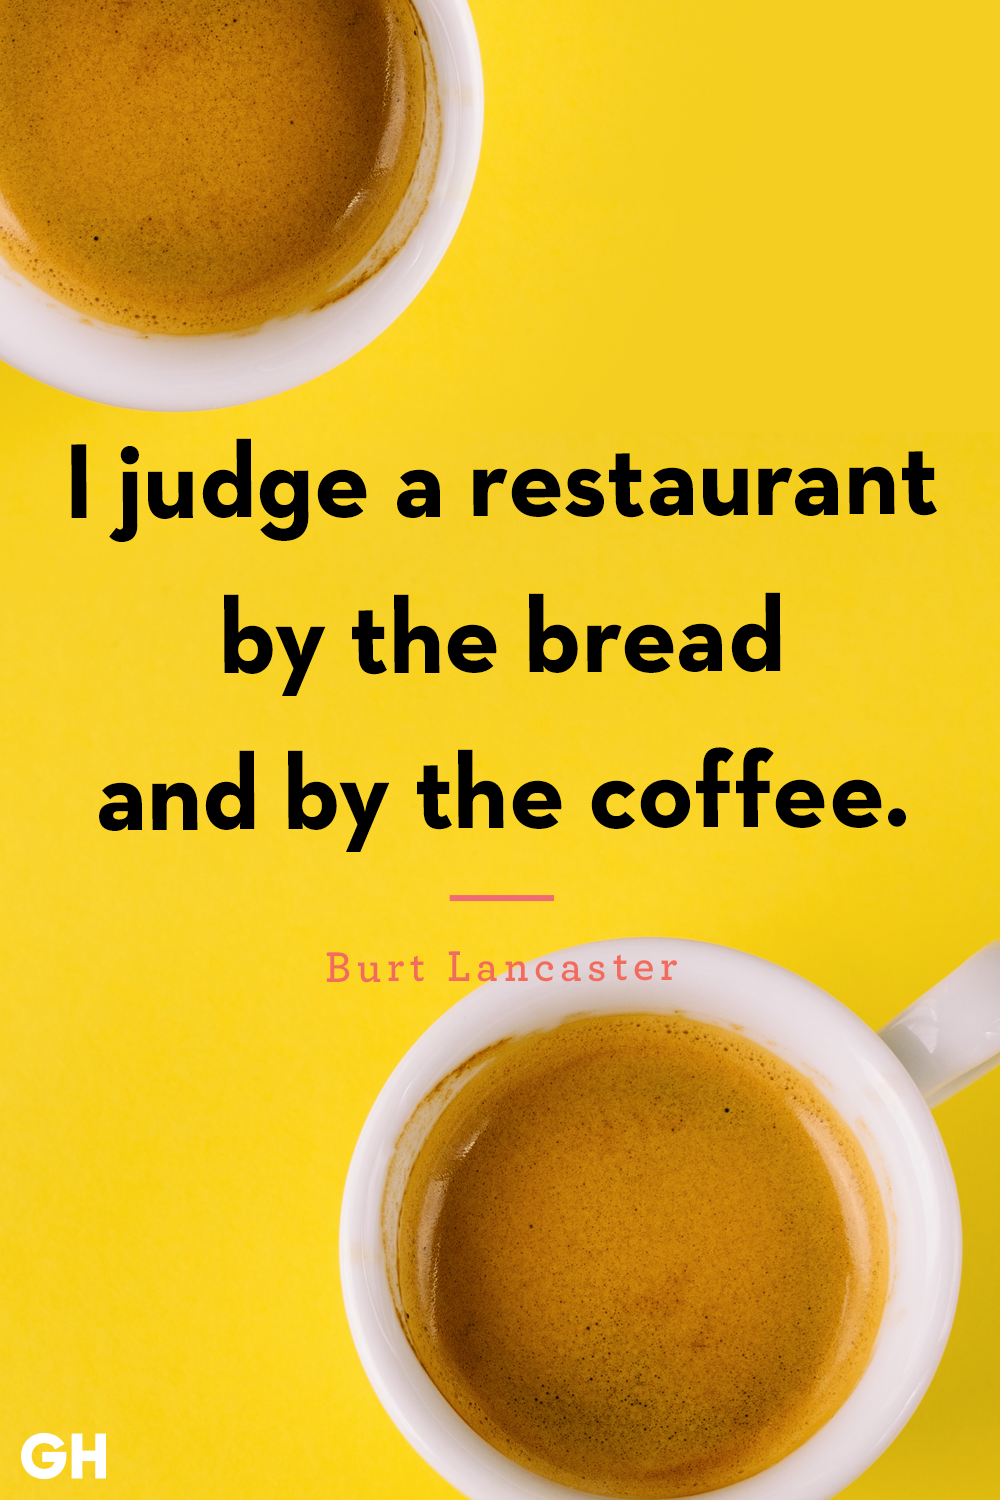 52 Best Funny Coffee Quotes and Sayings for Any Day of the Week